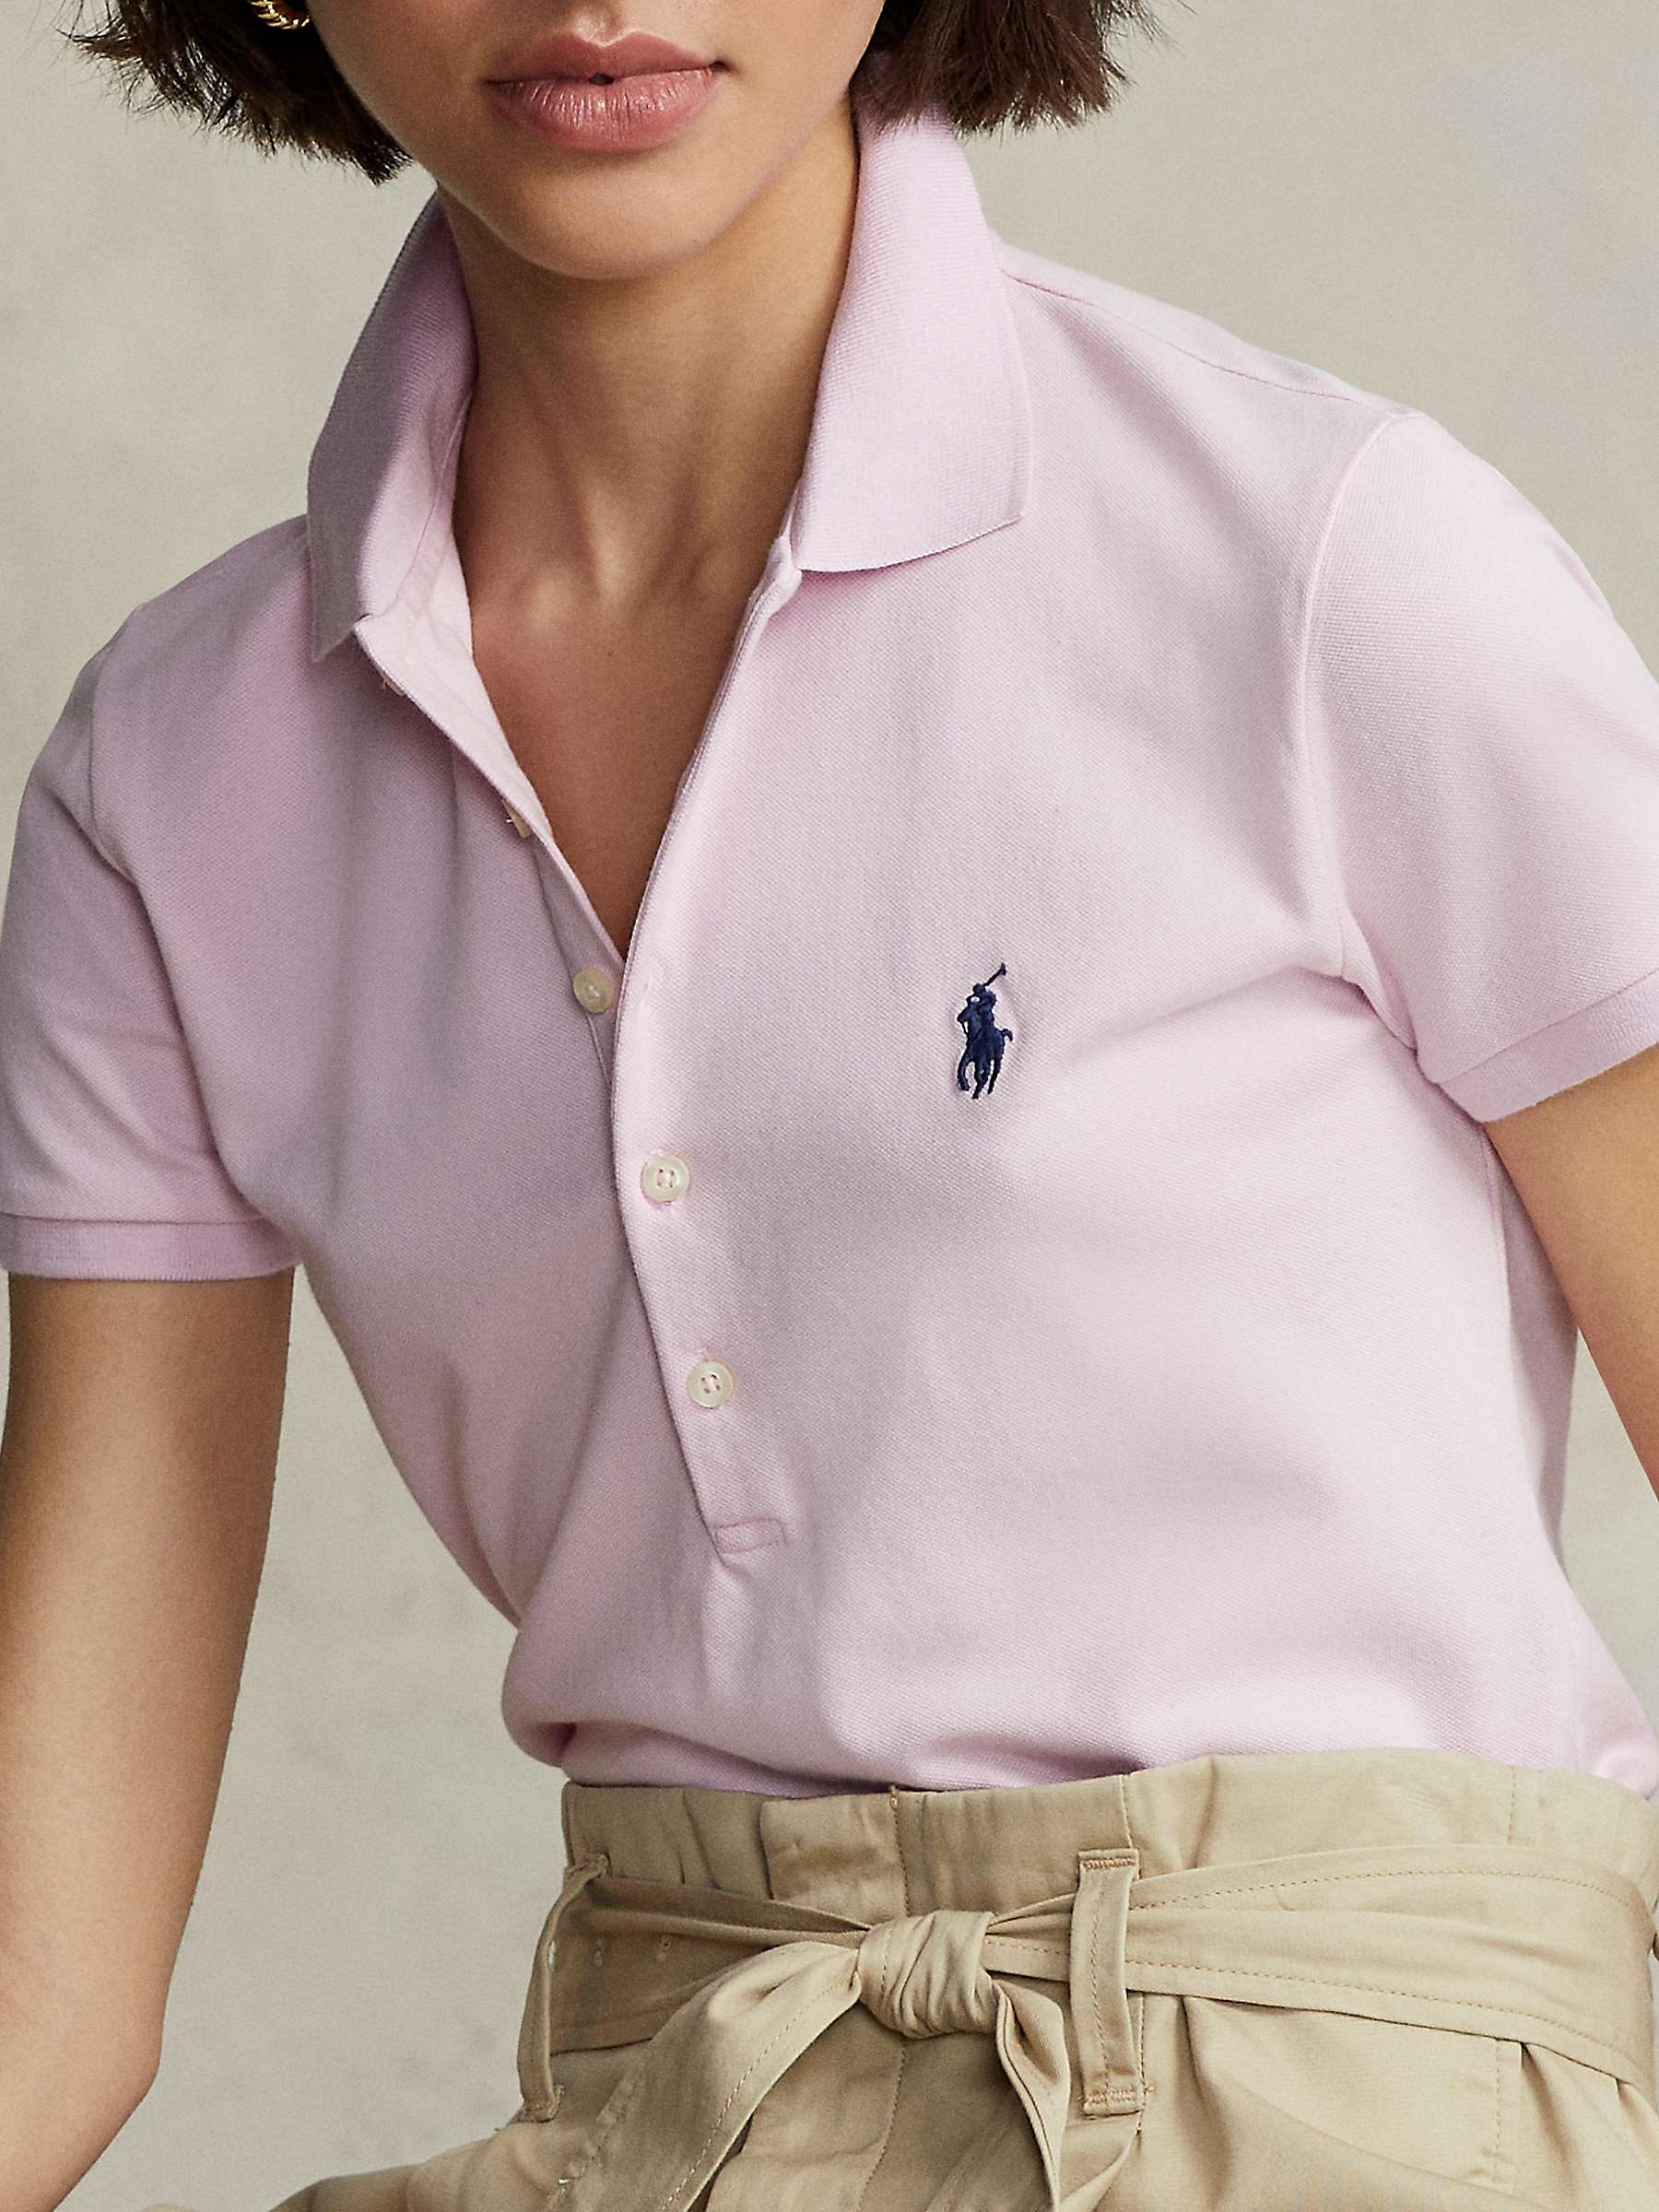 Buy Polo Ralph Lauren Polo Neck Top, Country Club Pink Online at johnlewis.com